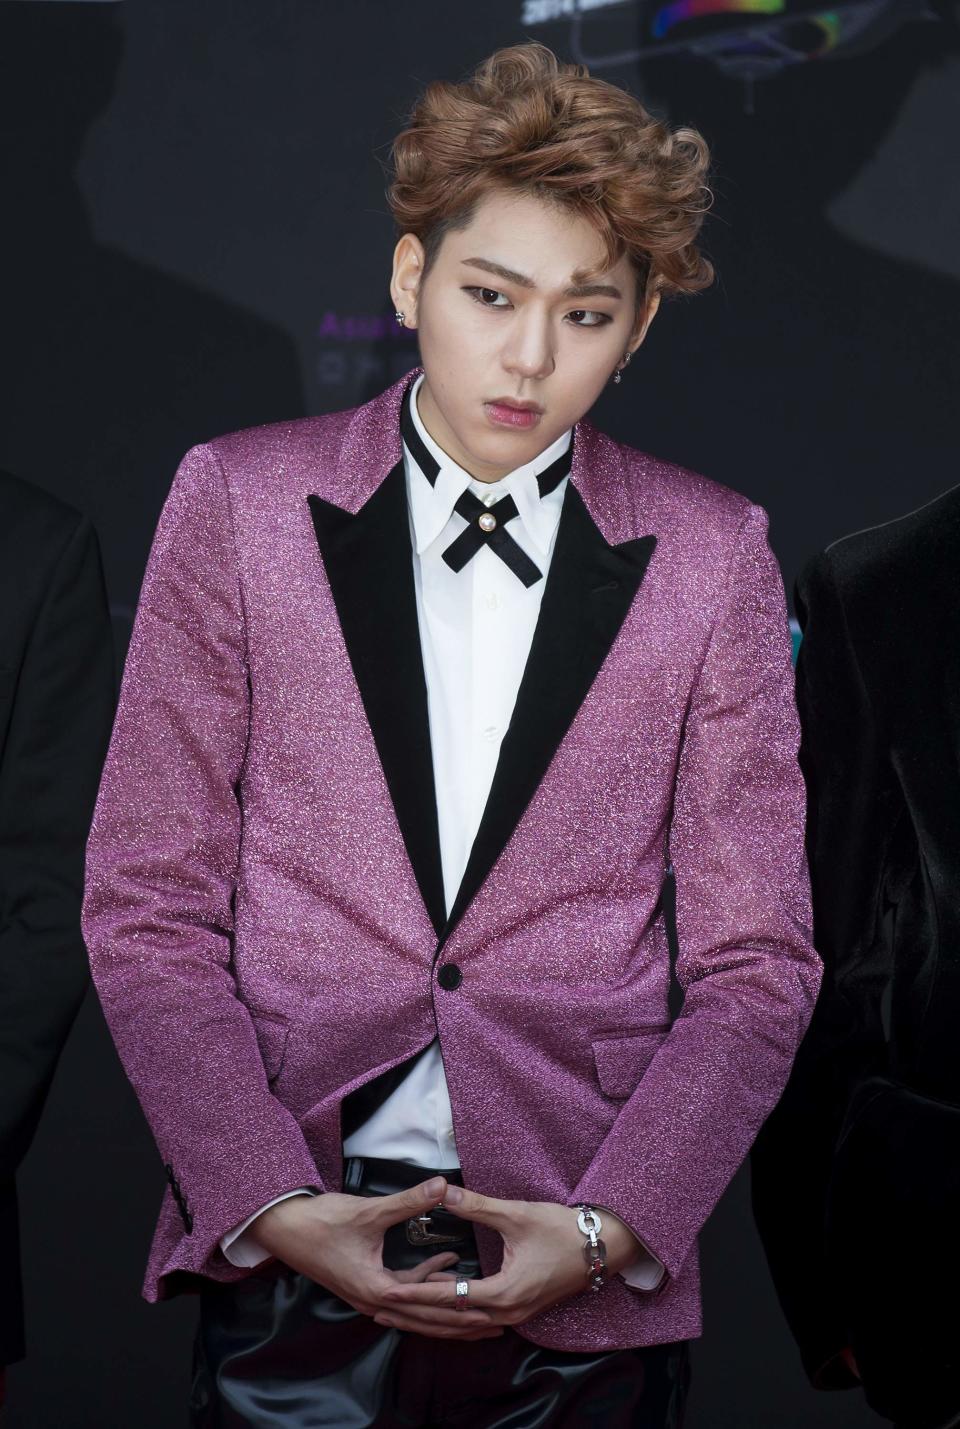 Zico, a member of the South Korean pop band Block B, poses on the red carpet as he attends the 2014 Mnet Asian Music Awards (MAMA) in Hong Kong